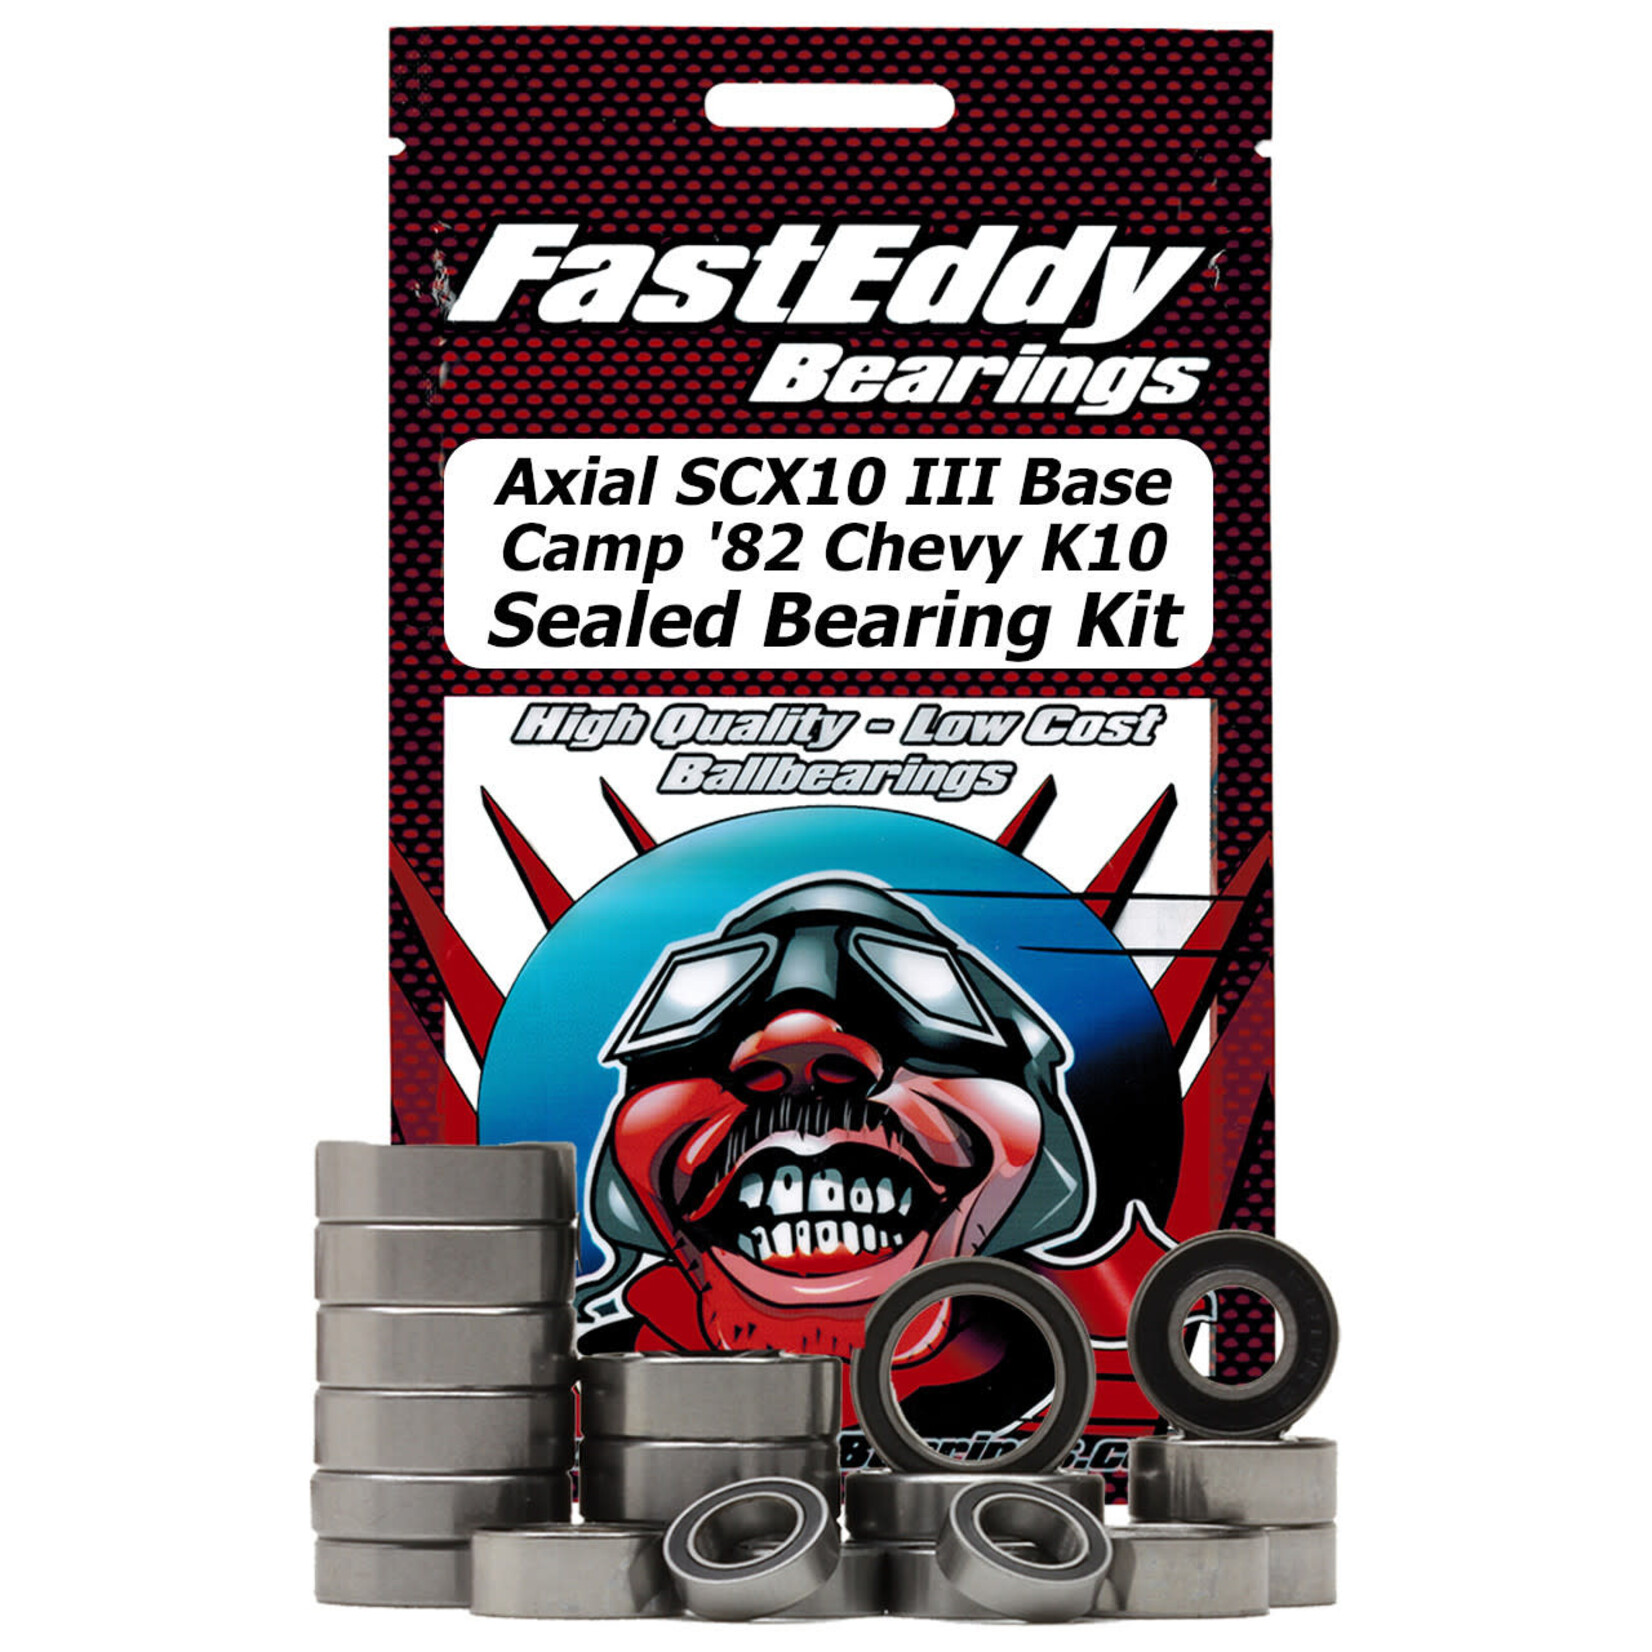 FastEddy FastEddy Axial SCX10 III Base Camp ’82 Chevy K10 RTR Sealed Bearing Kit #TFE8765